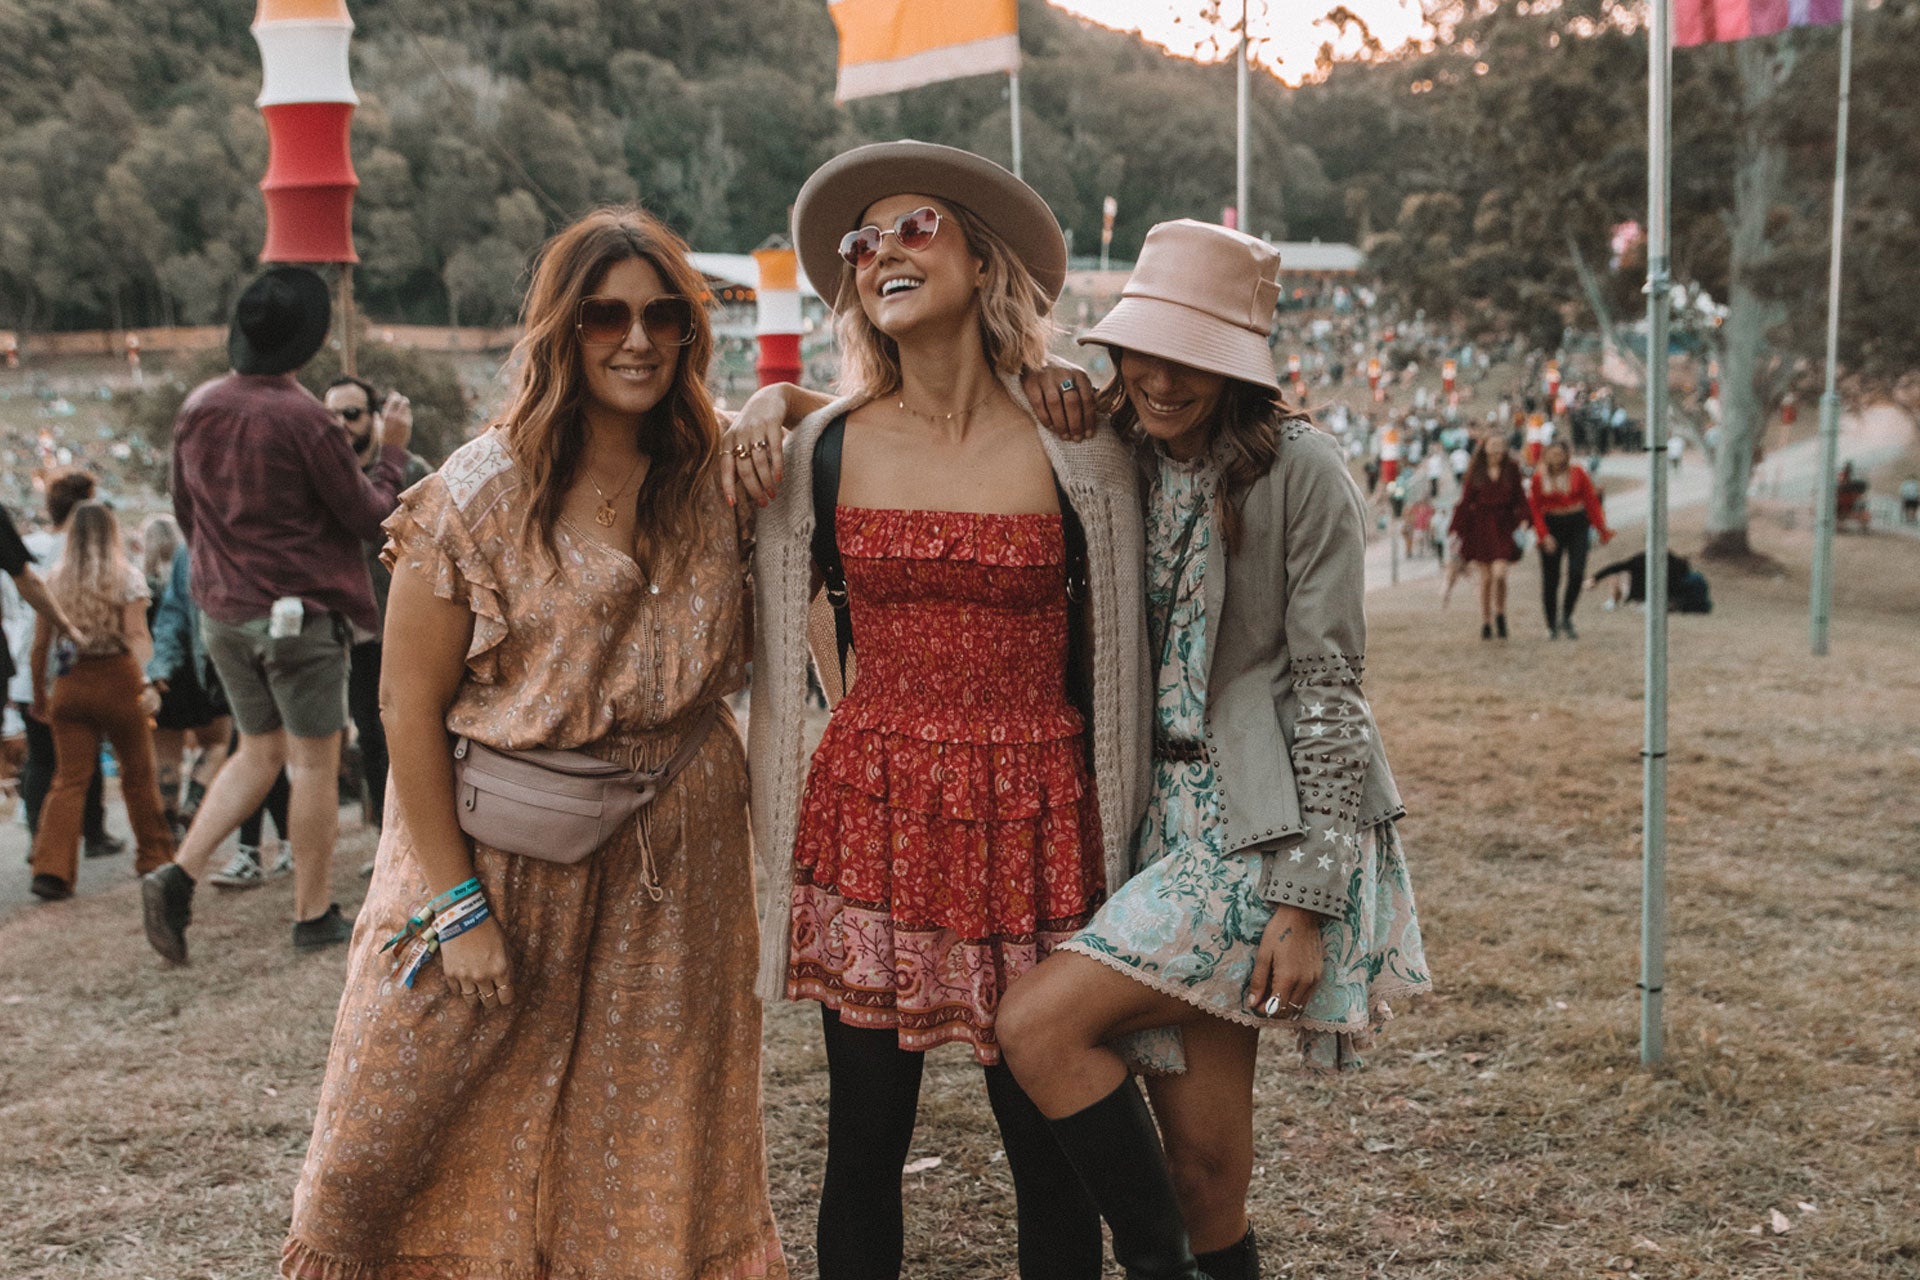 The Best Looks From Splendour in the Grass 2019